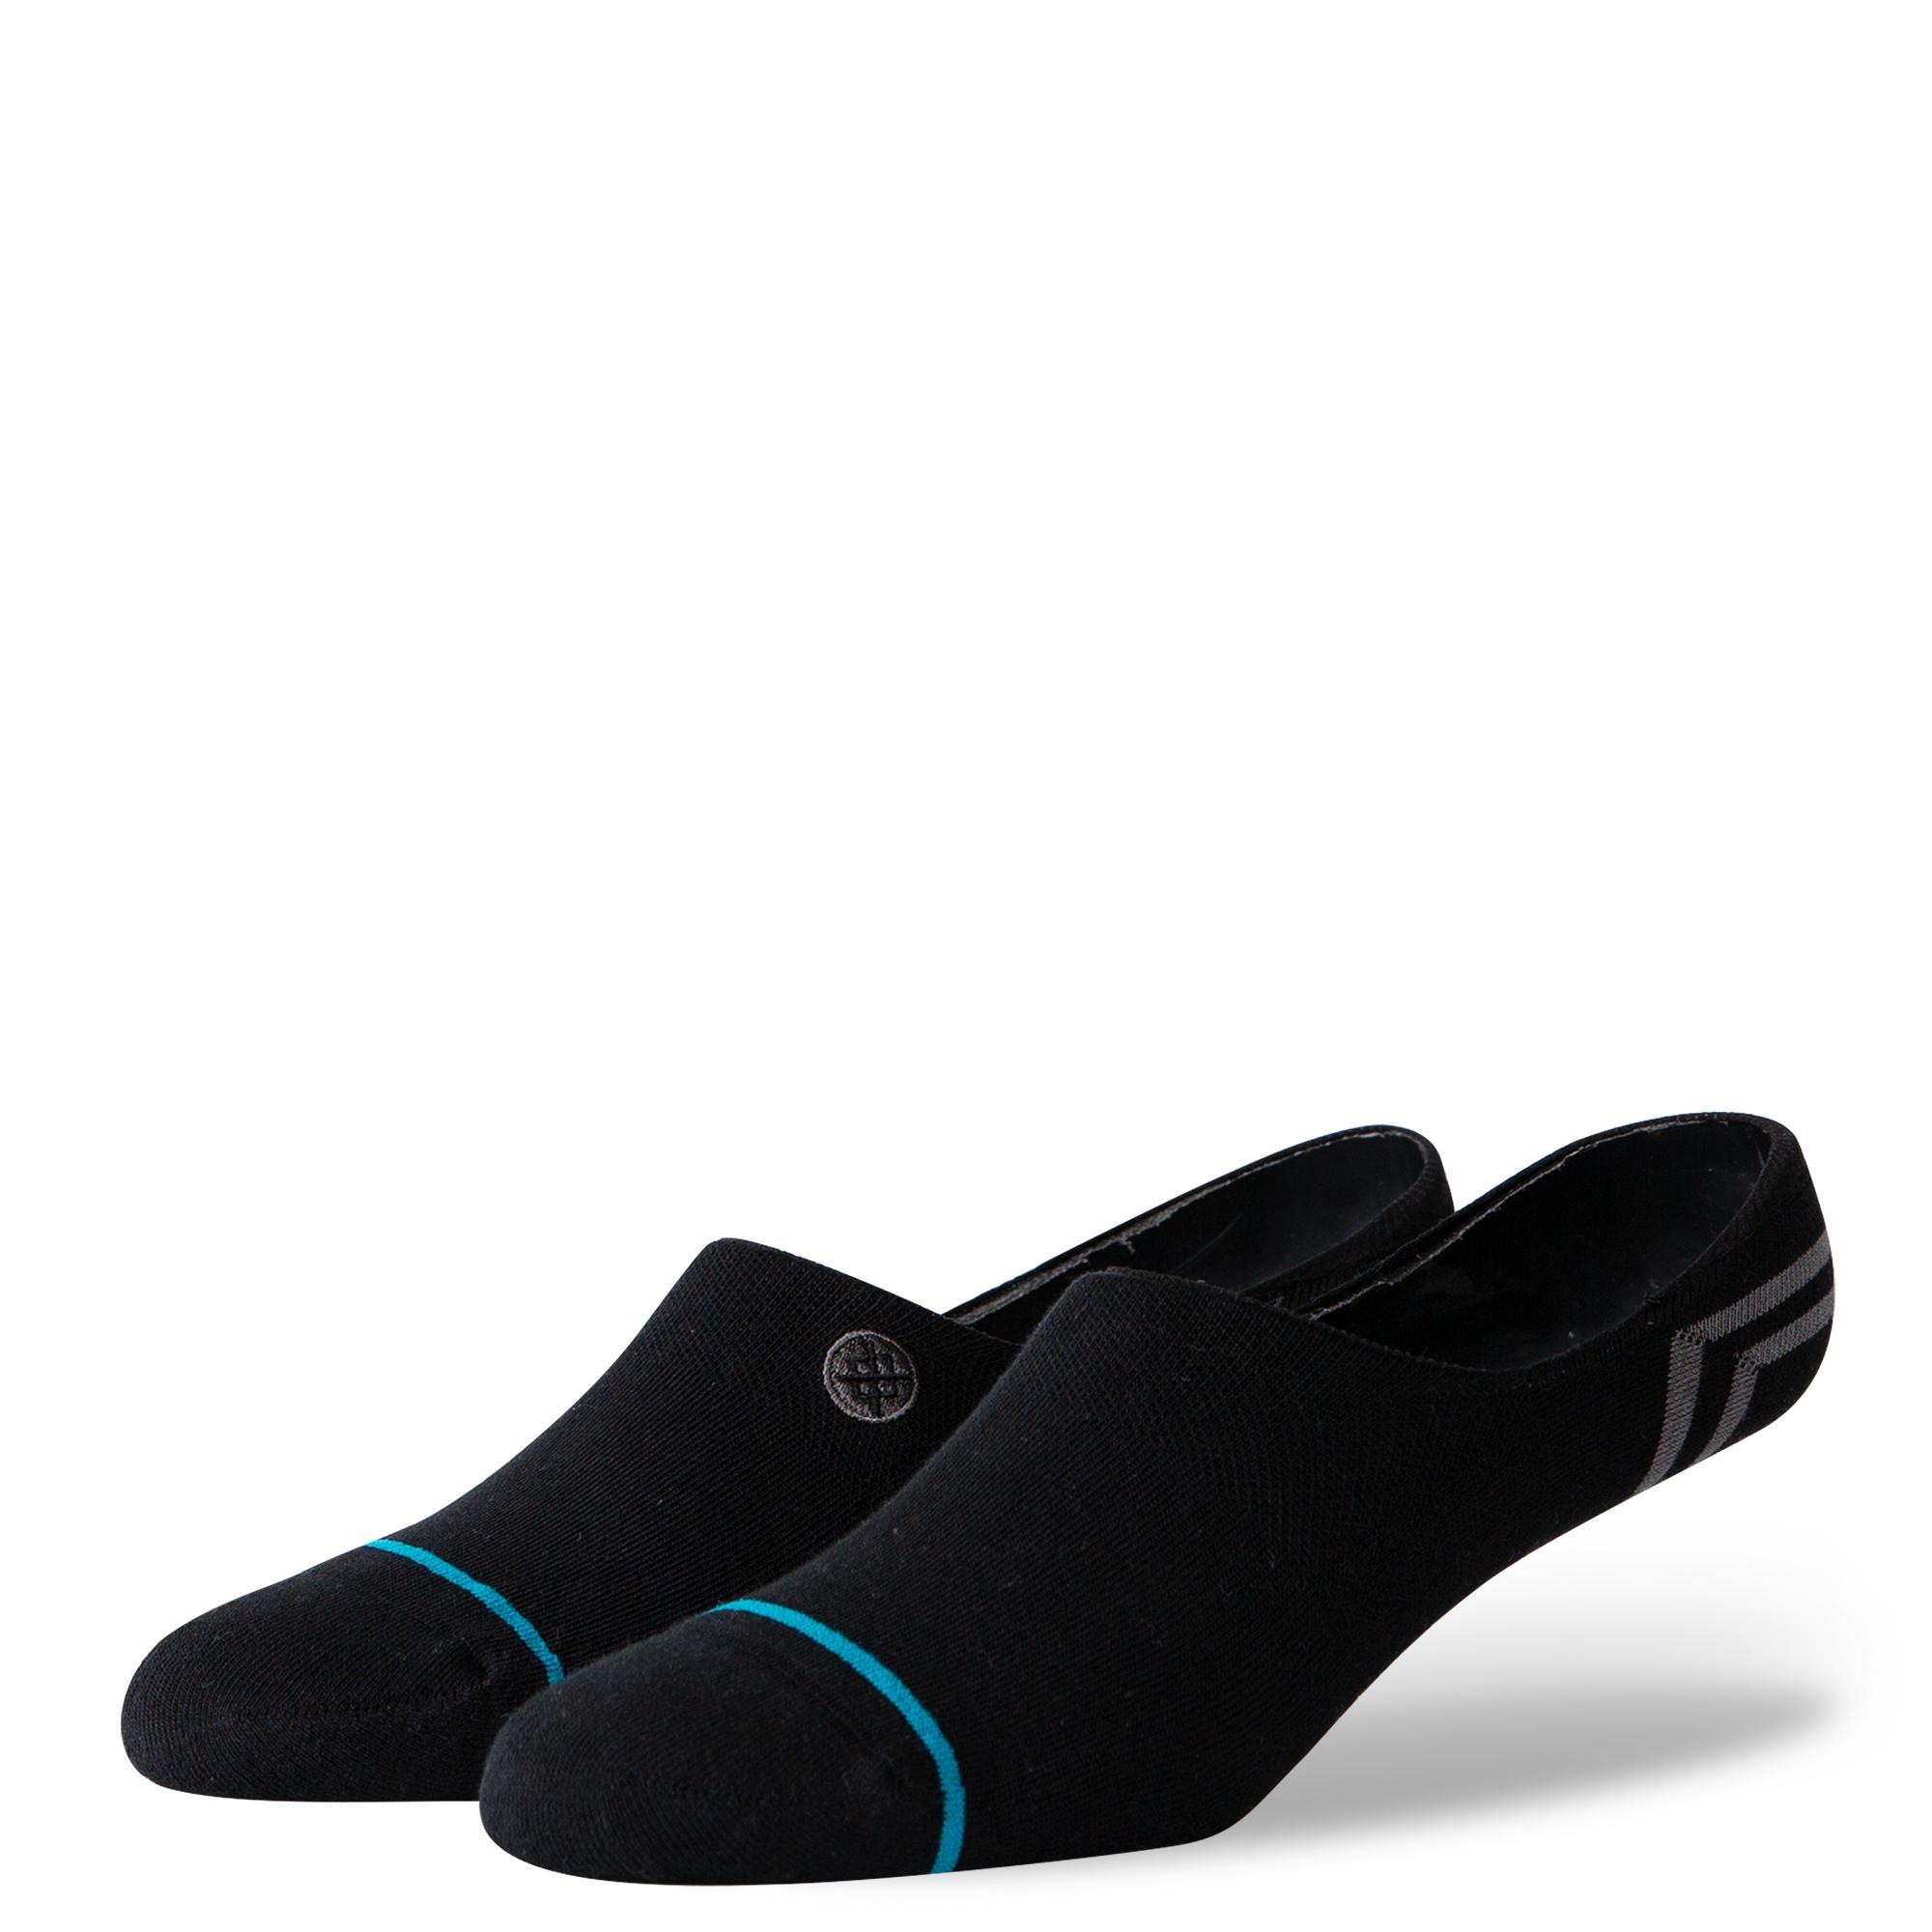 Stance Mens Icon No-Show Socks Product Image